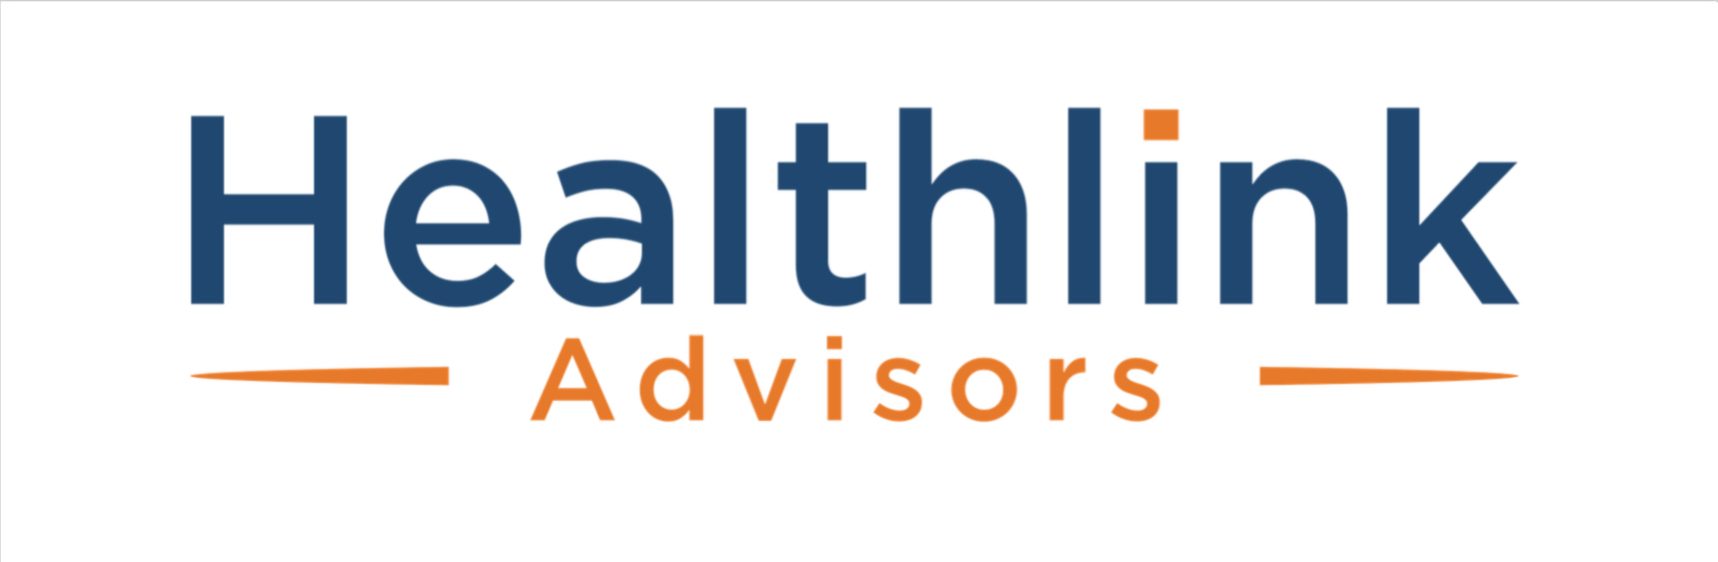 The 2022 Best Small Firms to Work For: Healthlink Advisors